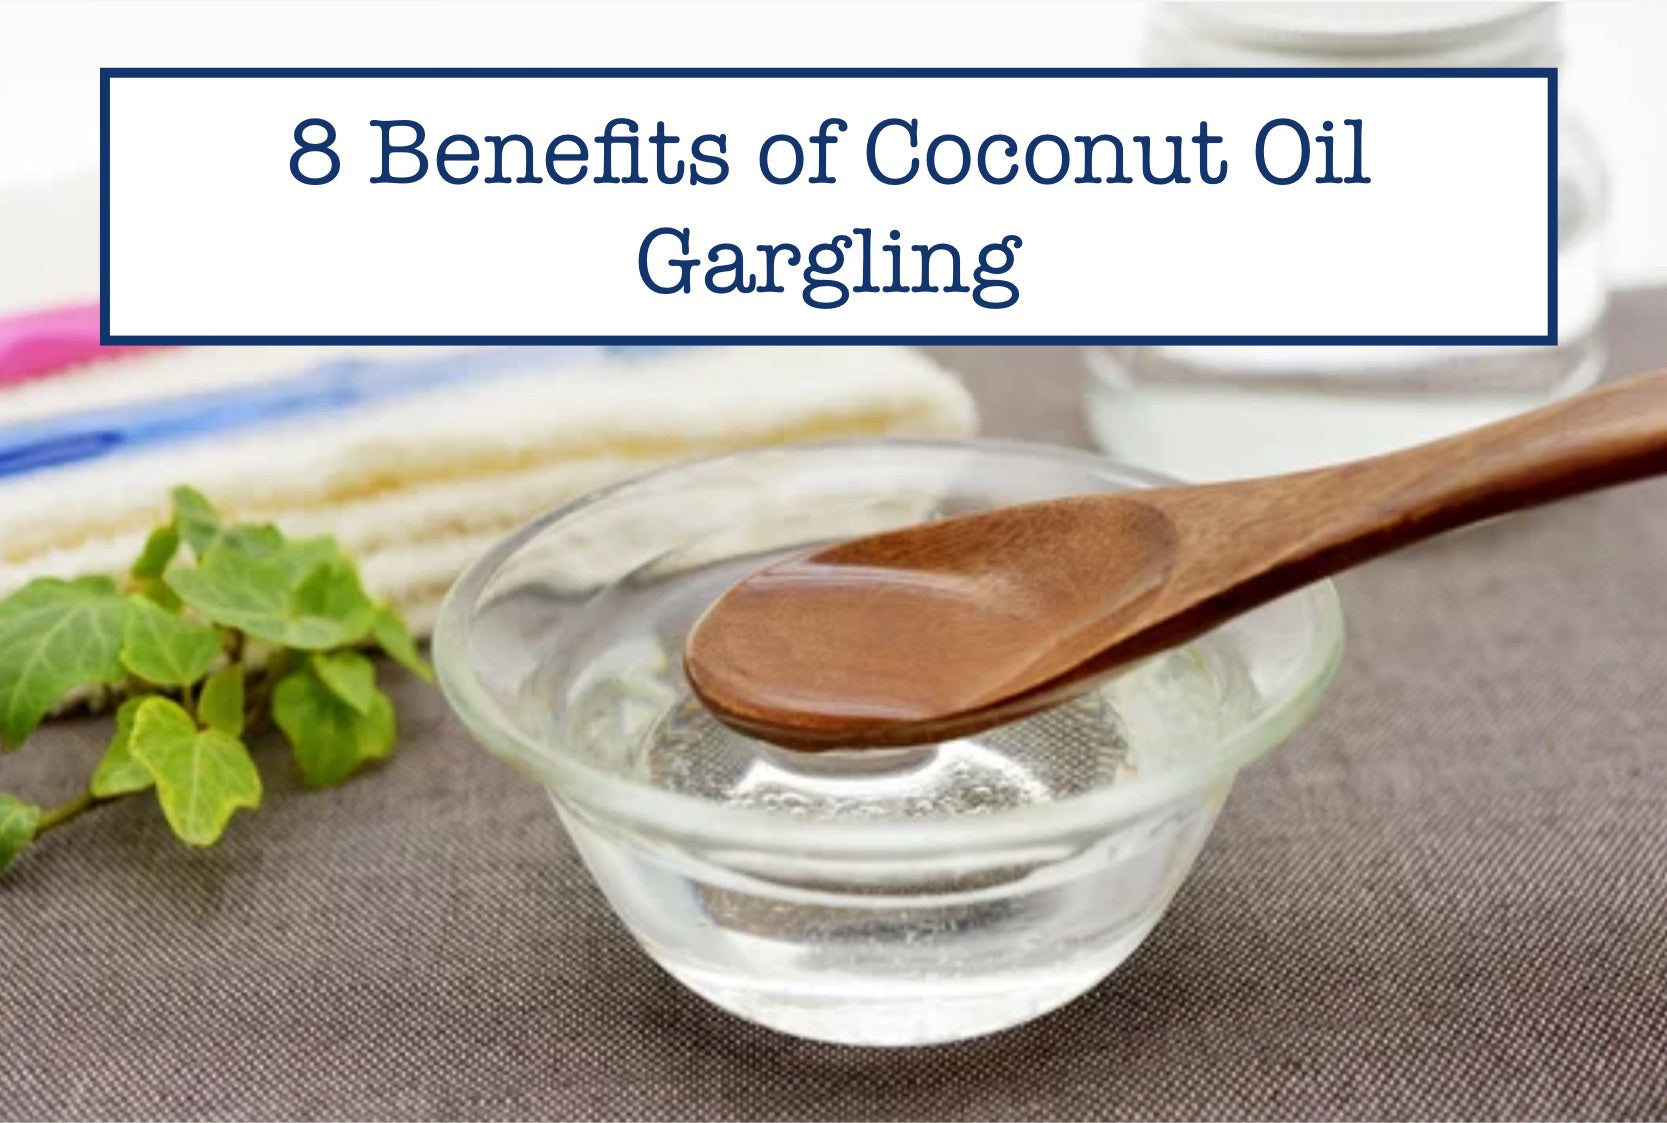 8 Benefits of Coconut Oil Gargling